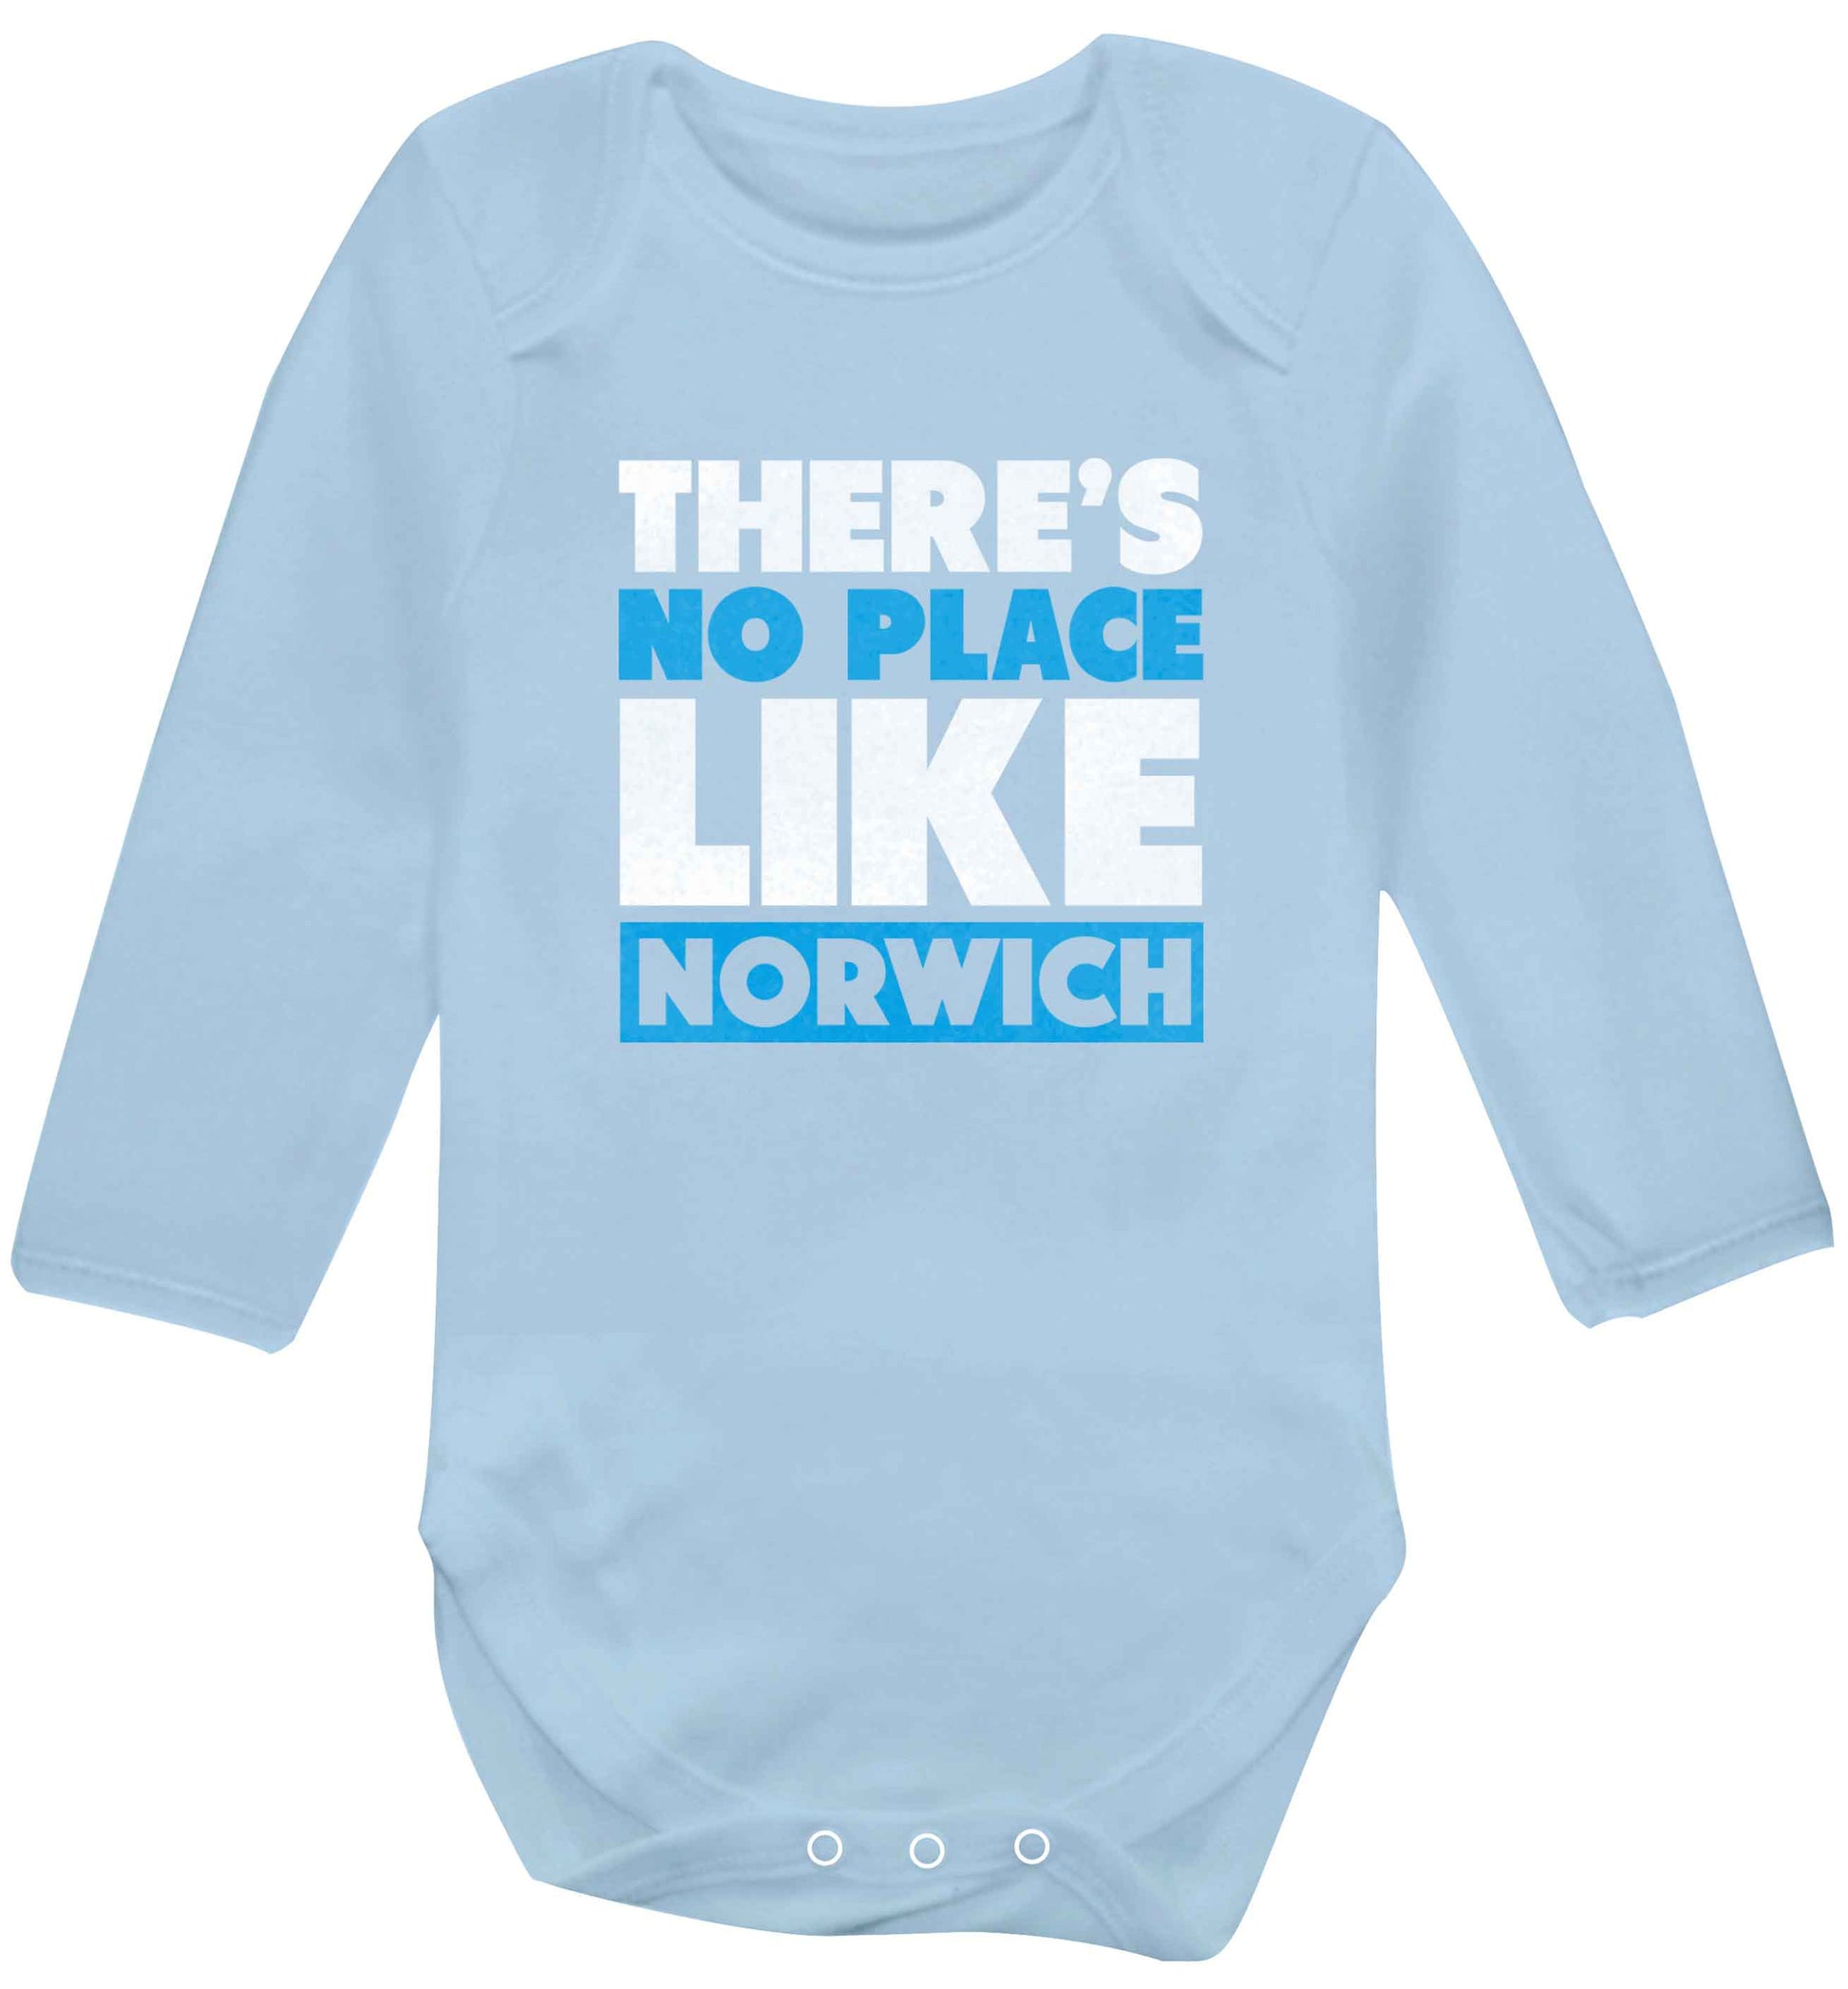 There's no place like Norwich baby vest long sleeved pale blue 6-12 months